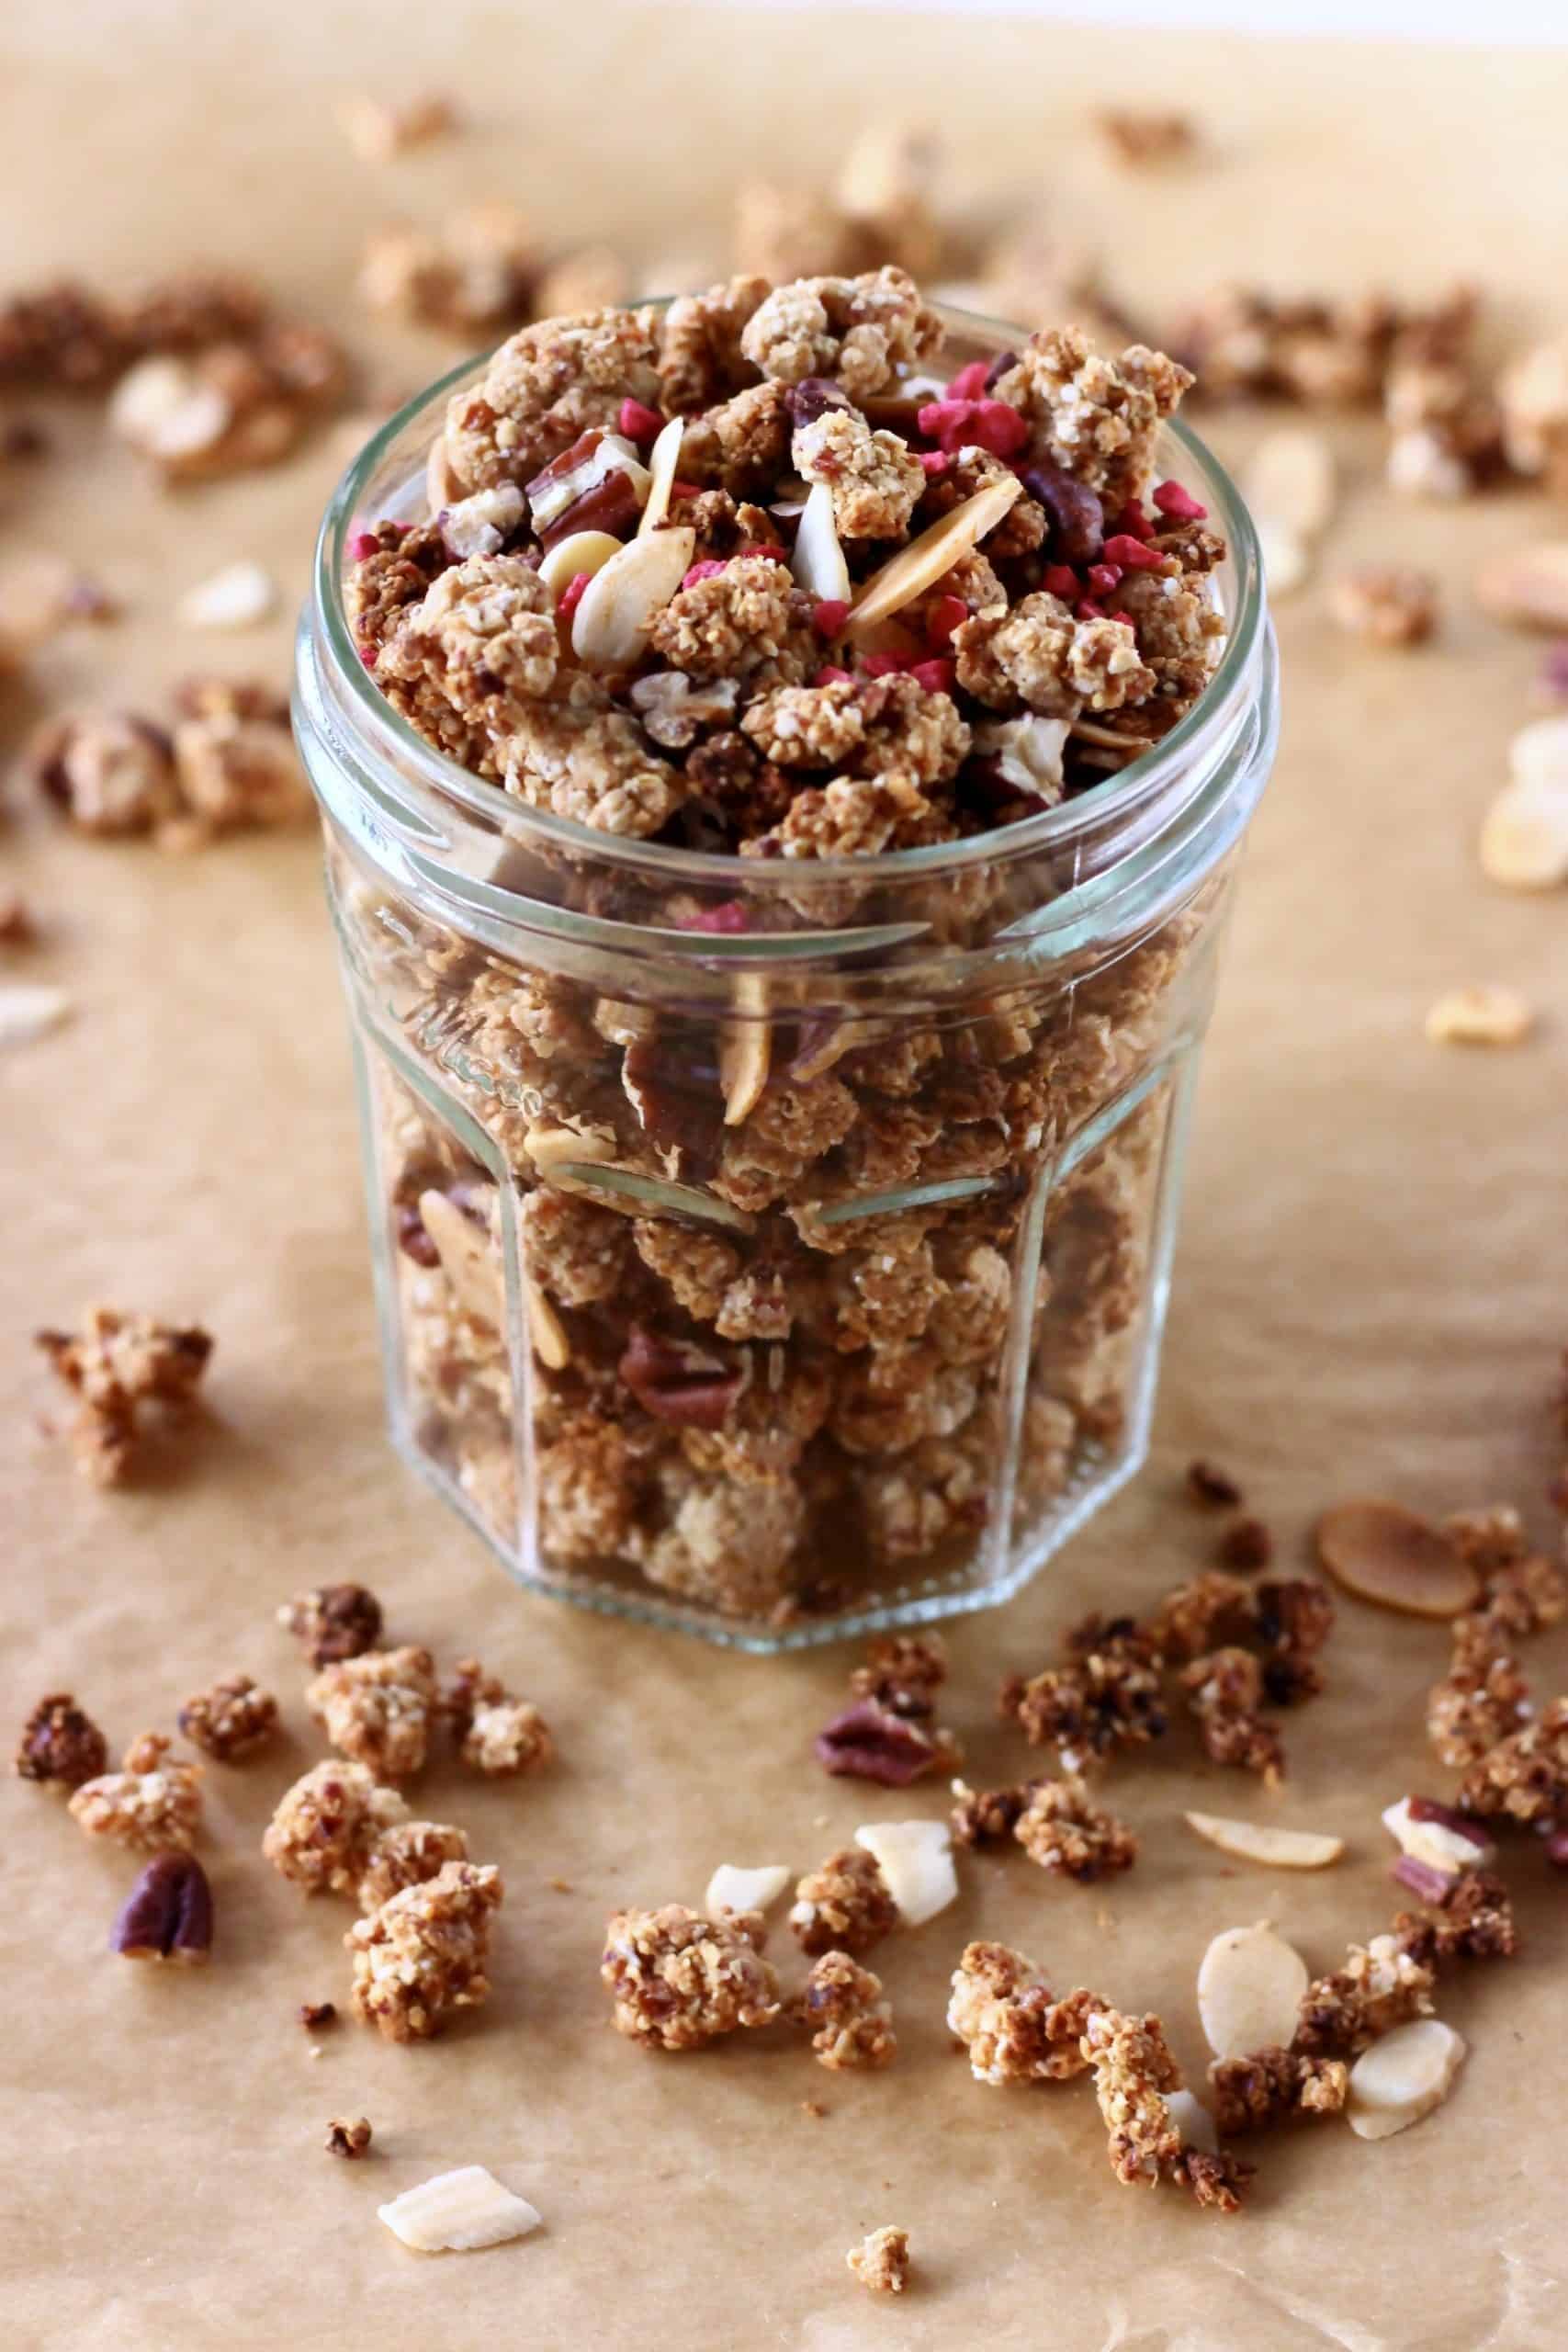 Clusters of gluten-free vegan granola with nuts in a glass jar